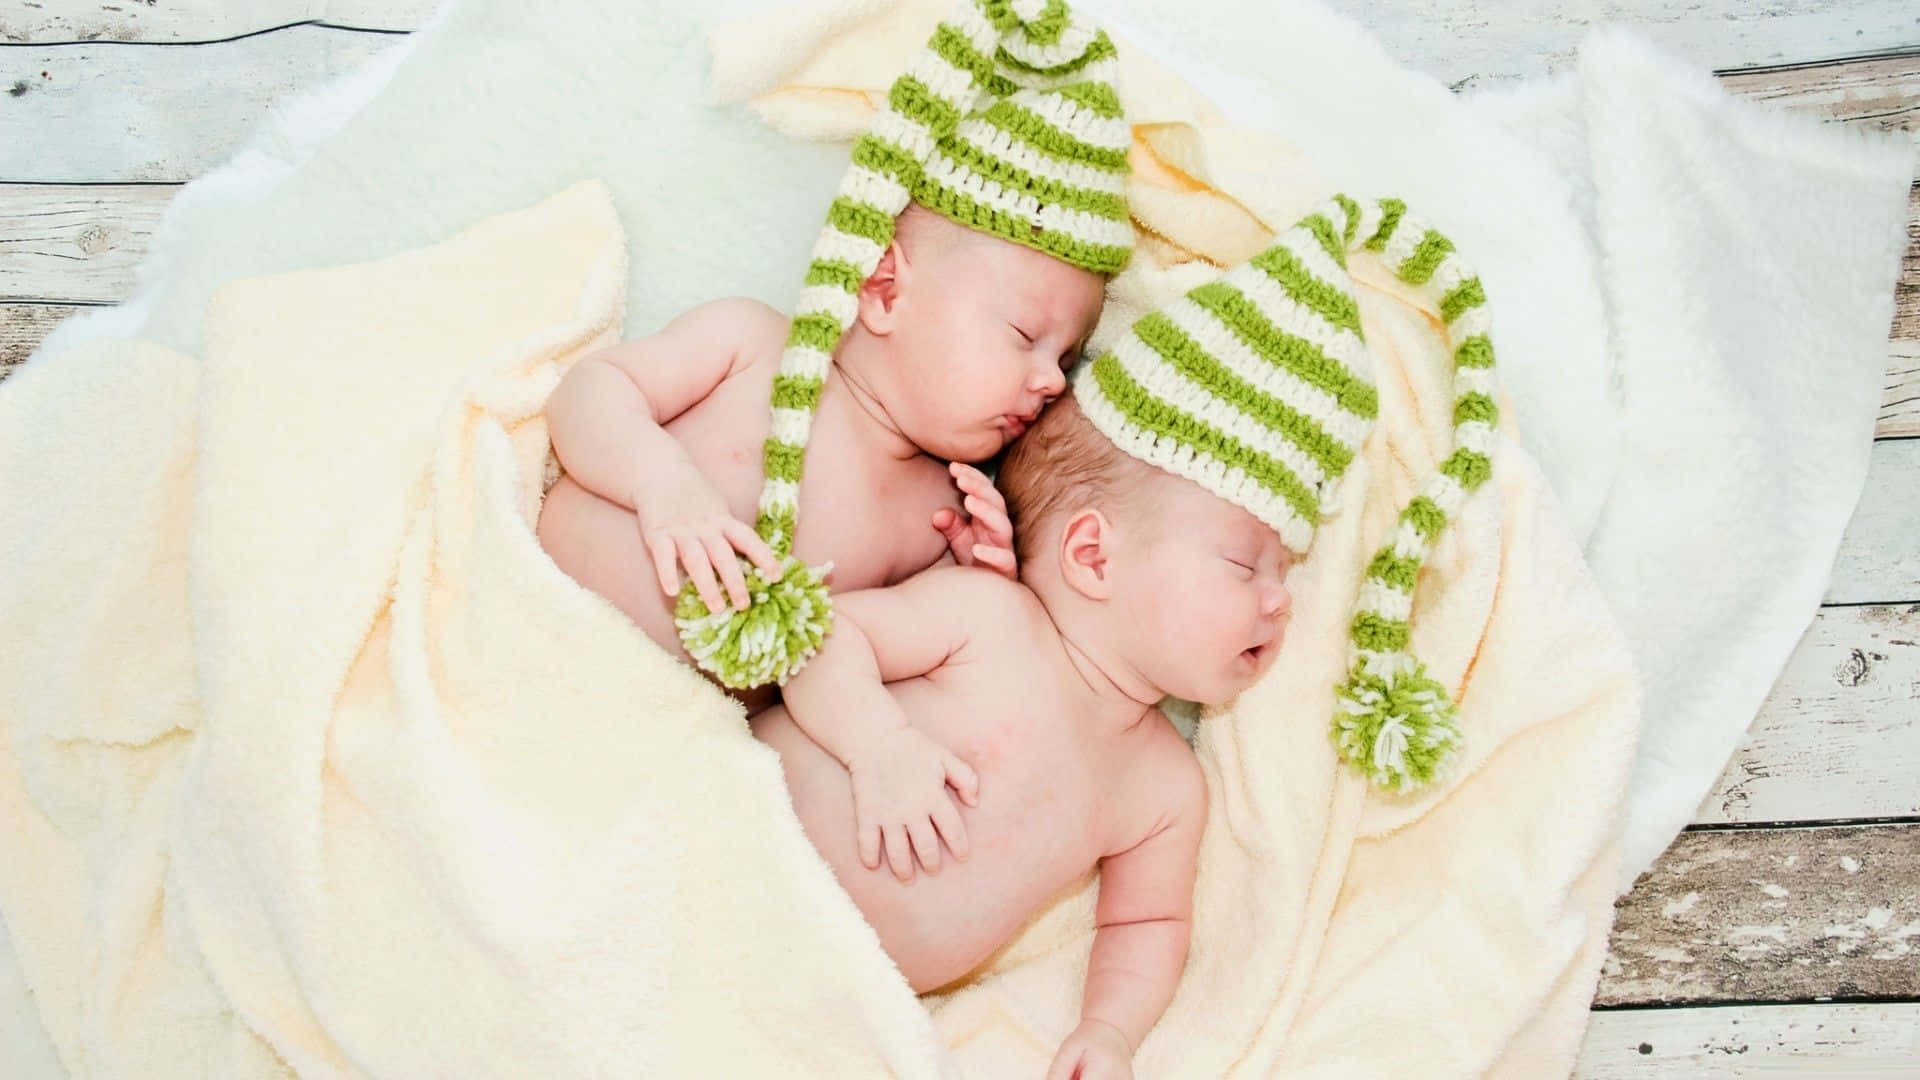 Adorable Twin Babies Smiling and Laughing Together